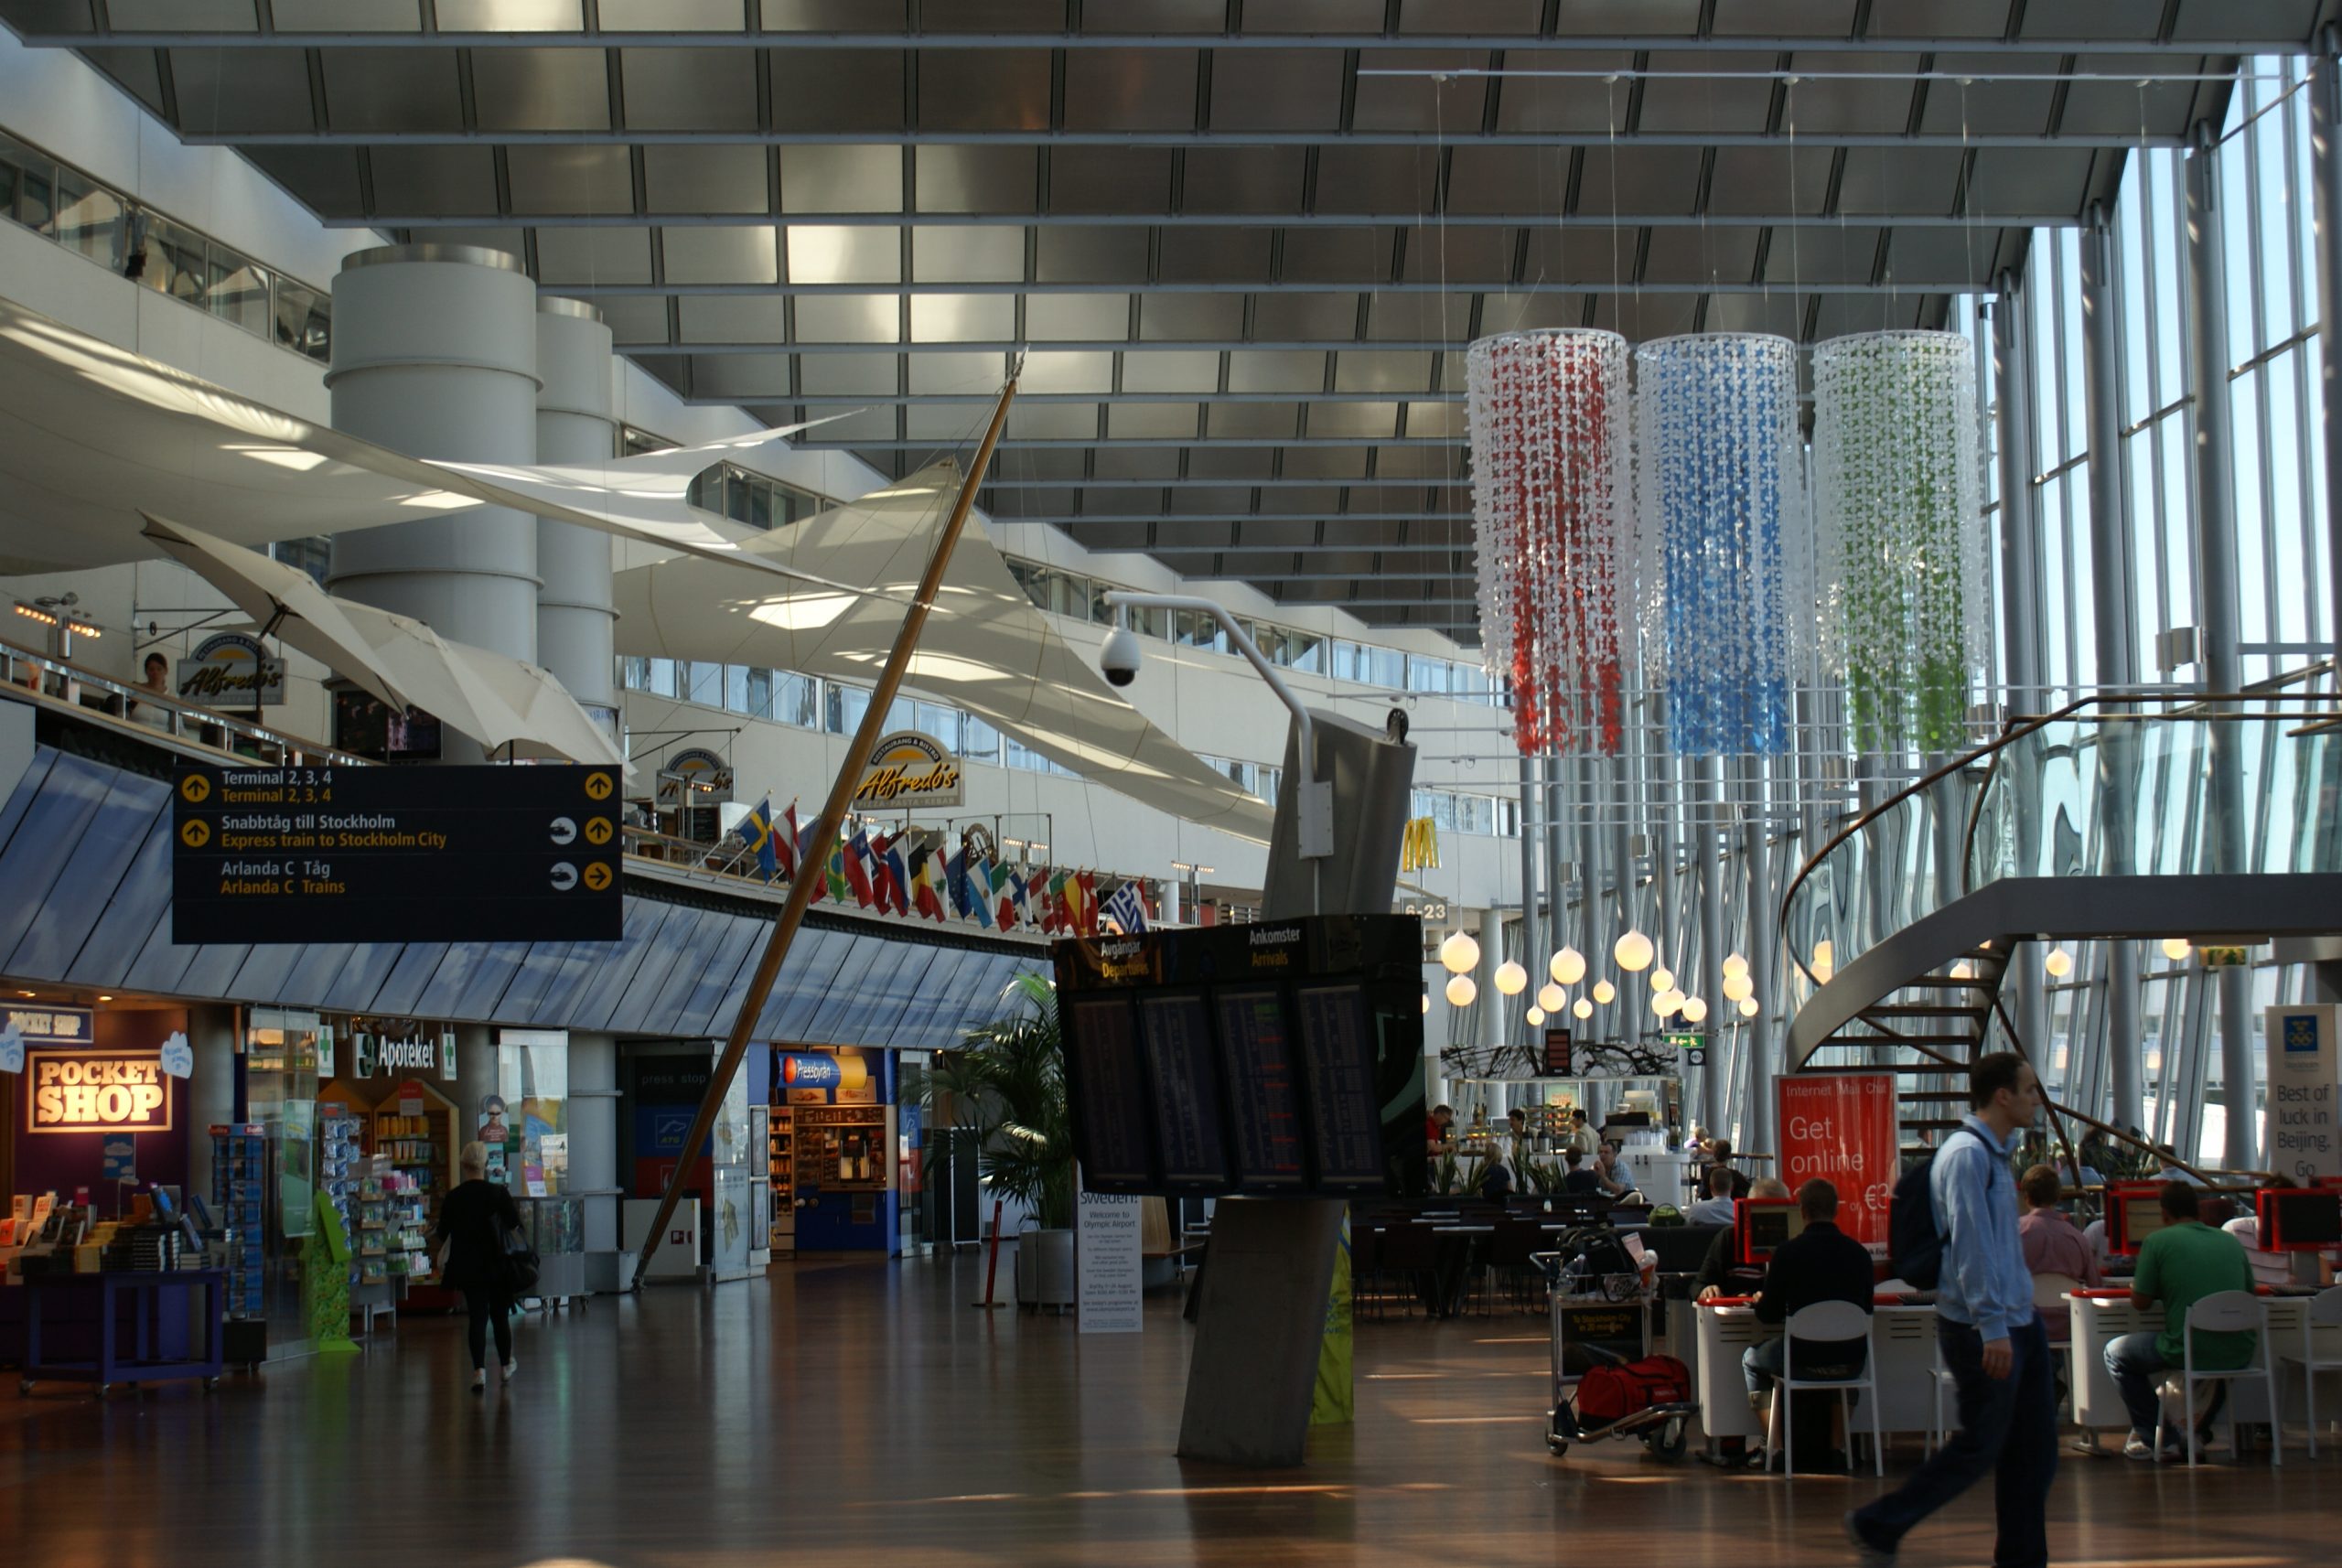 Stockholm's airports 1/2: How to get to/from Arlanda (ARN) - Student blogs